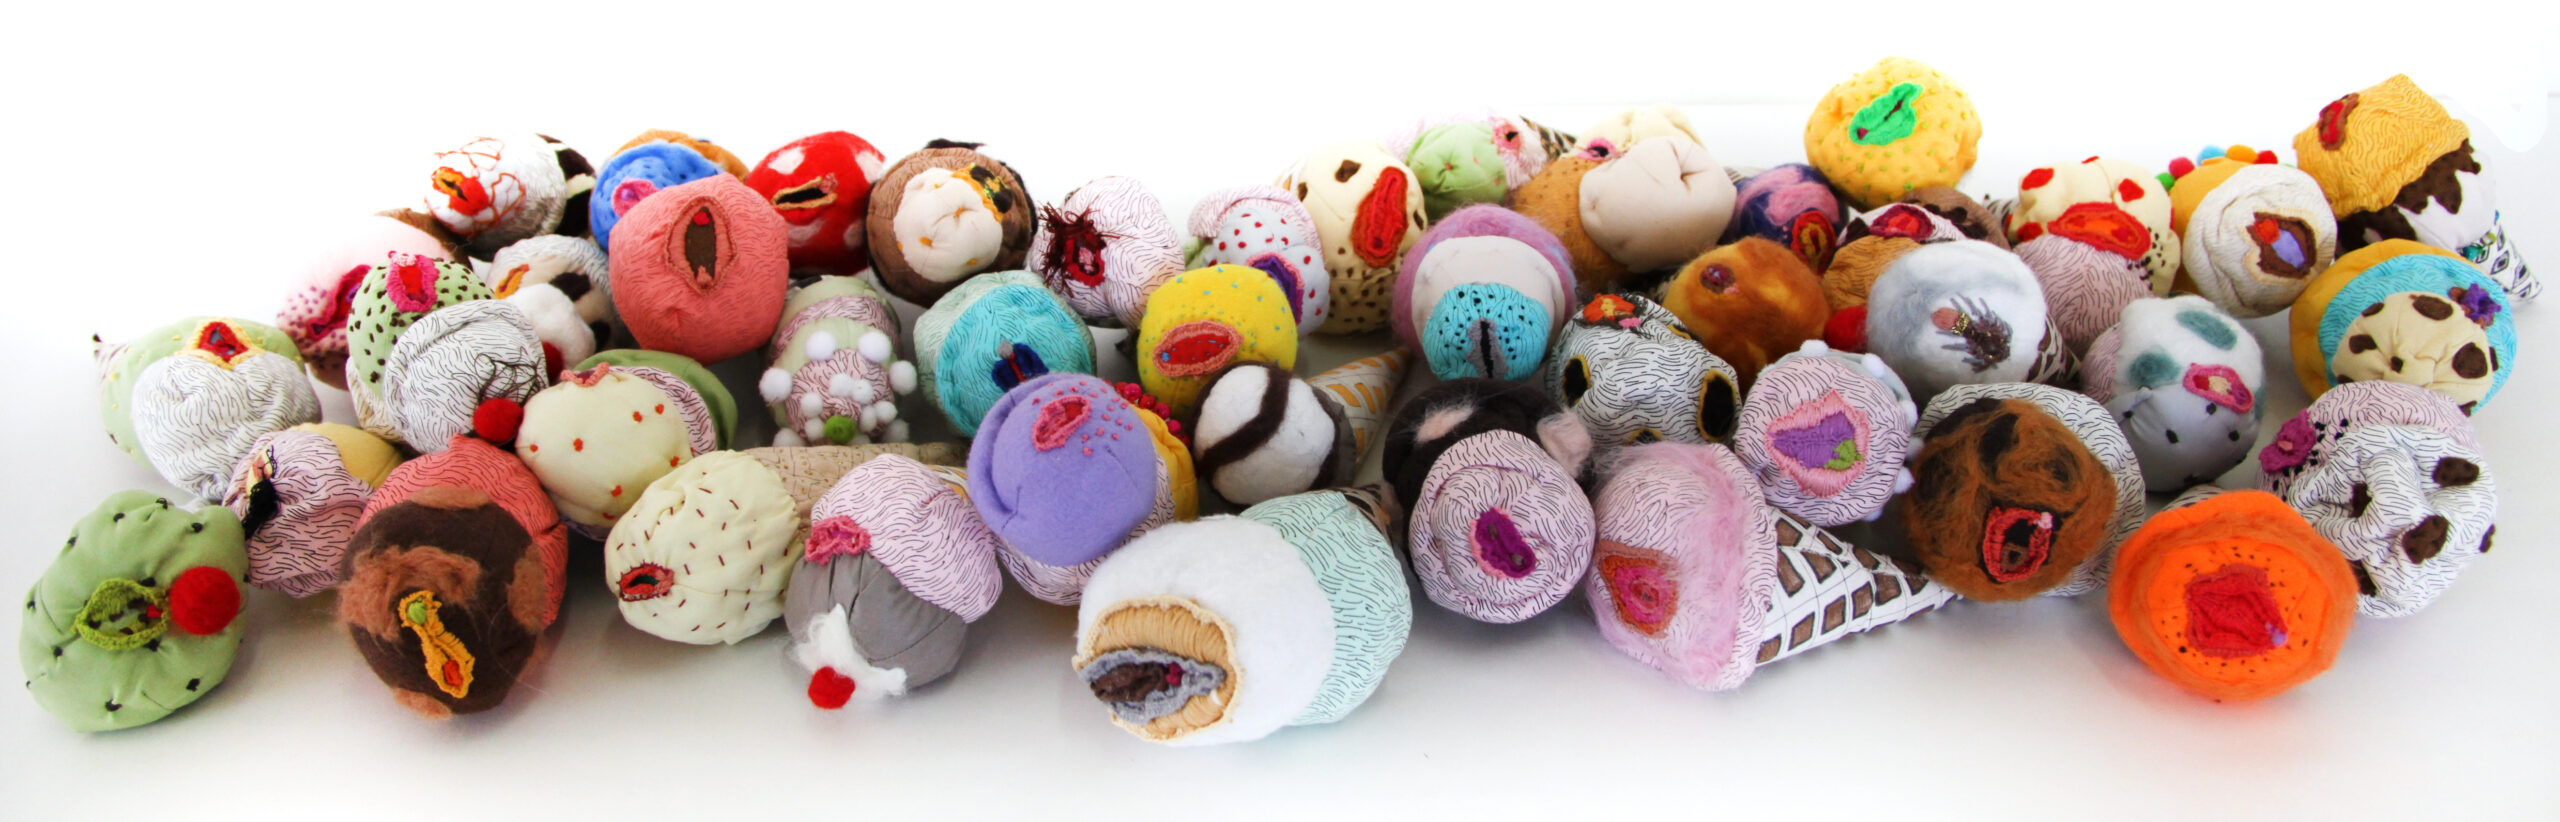 A colorful pile of several dozen soft-sculpture ice cream cones alluding to vaginas and made of various fabrics, pompoms, beads and accessories. Some of the fabrics are screen printed with patterns.